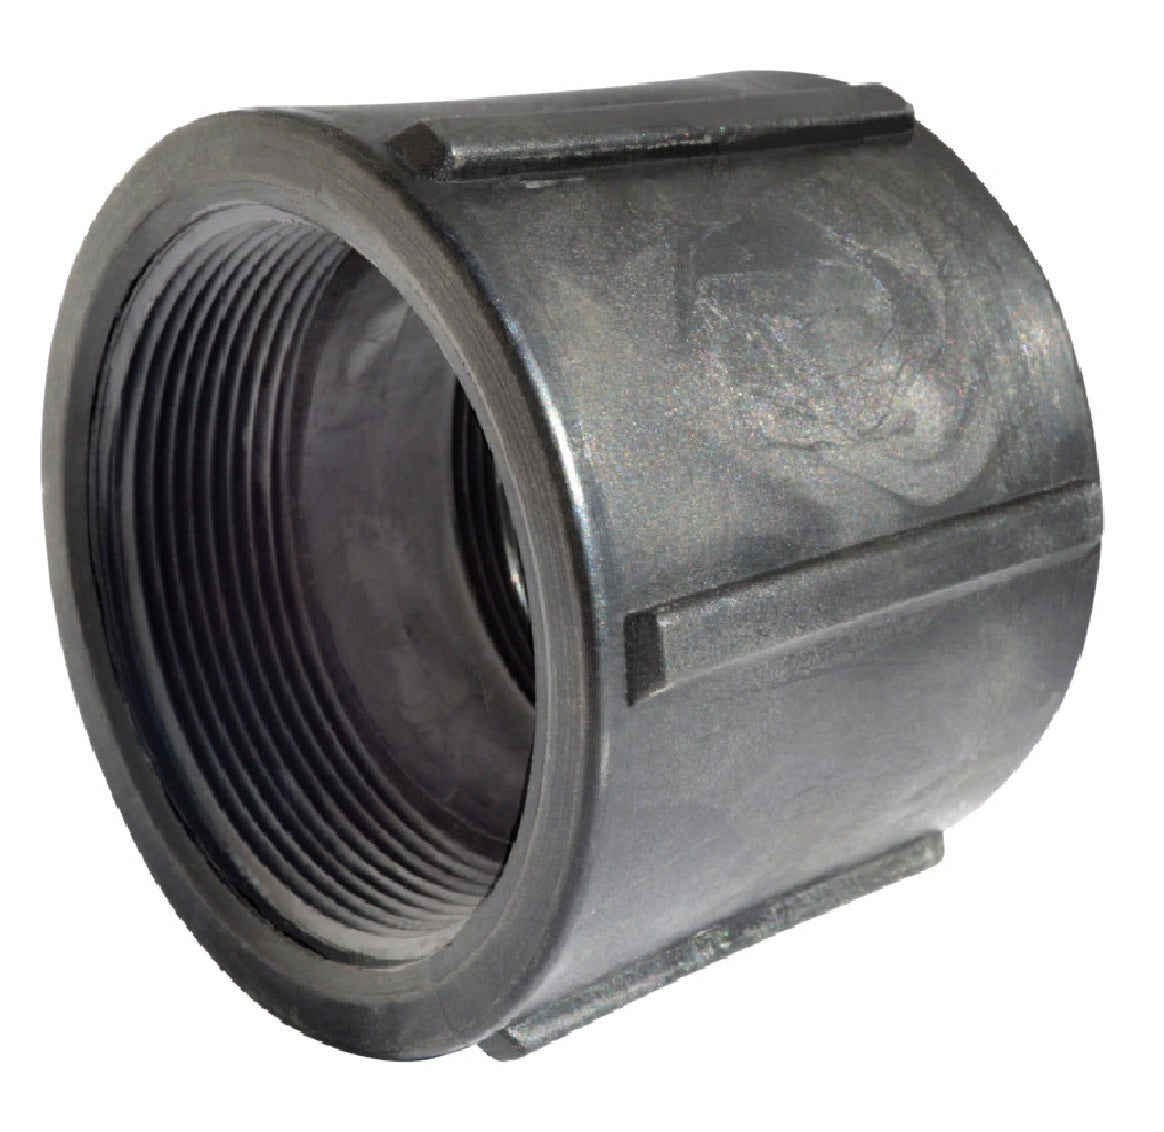 Green Leaf CPLG075 Heavy-Duty Coupling, Black